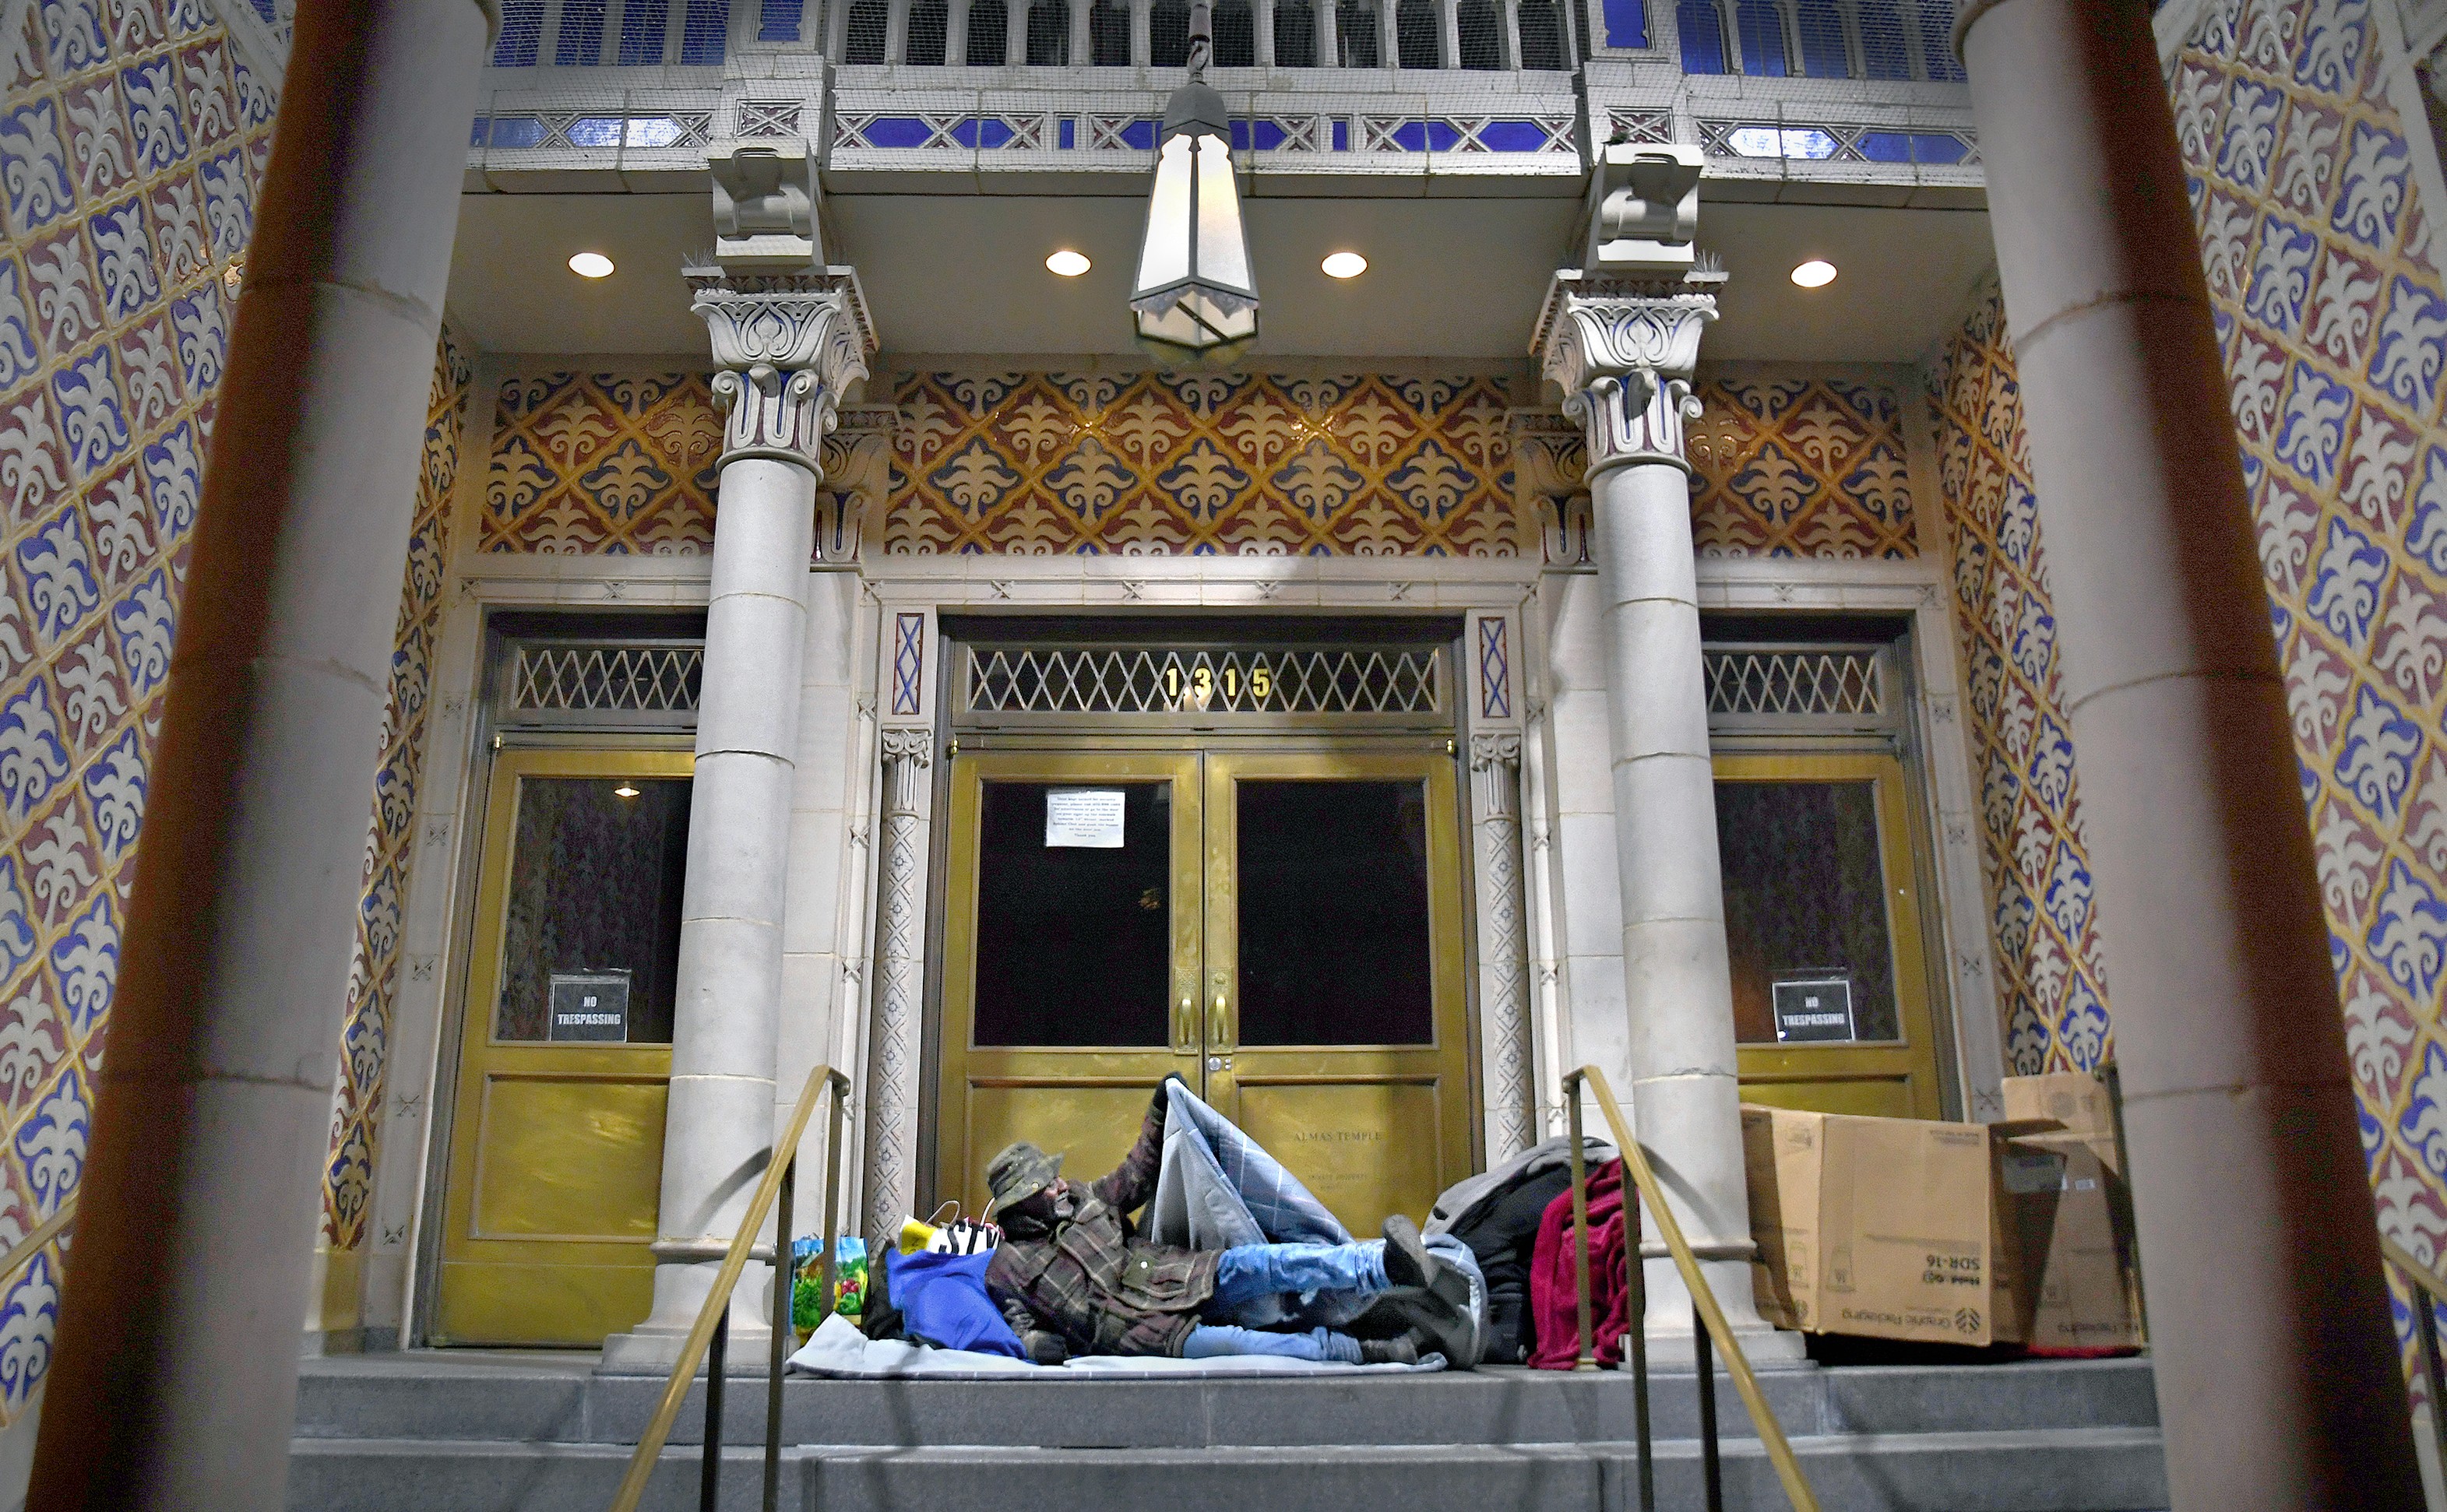 A homeless man in Washington D.C. beds down for the night opposite Franklin Square park on the steps of the Sphinx Club at Almas Temple. Donald Trump’s cuts to social spending, while raising the defence budget and offering tax cuts that benefit the rich, have contributed to increased inequality. Photo: Washington Post